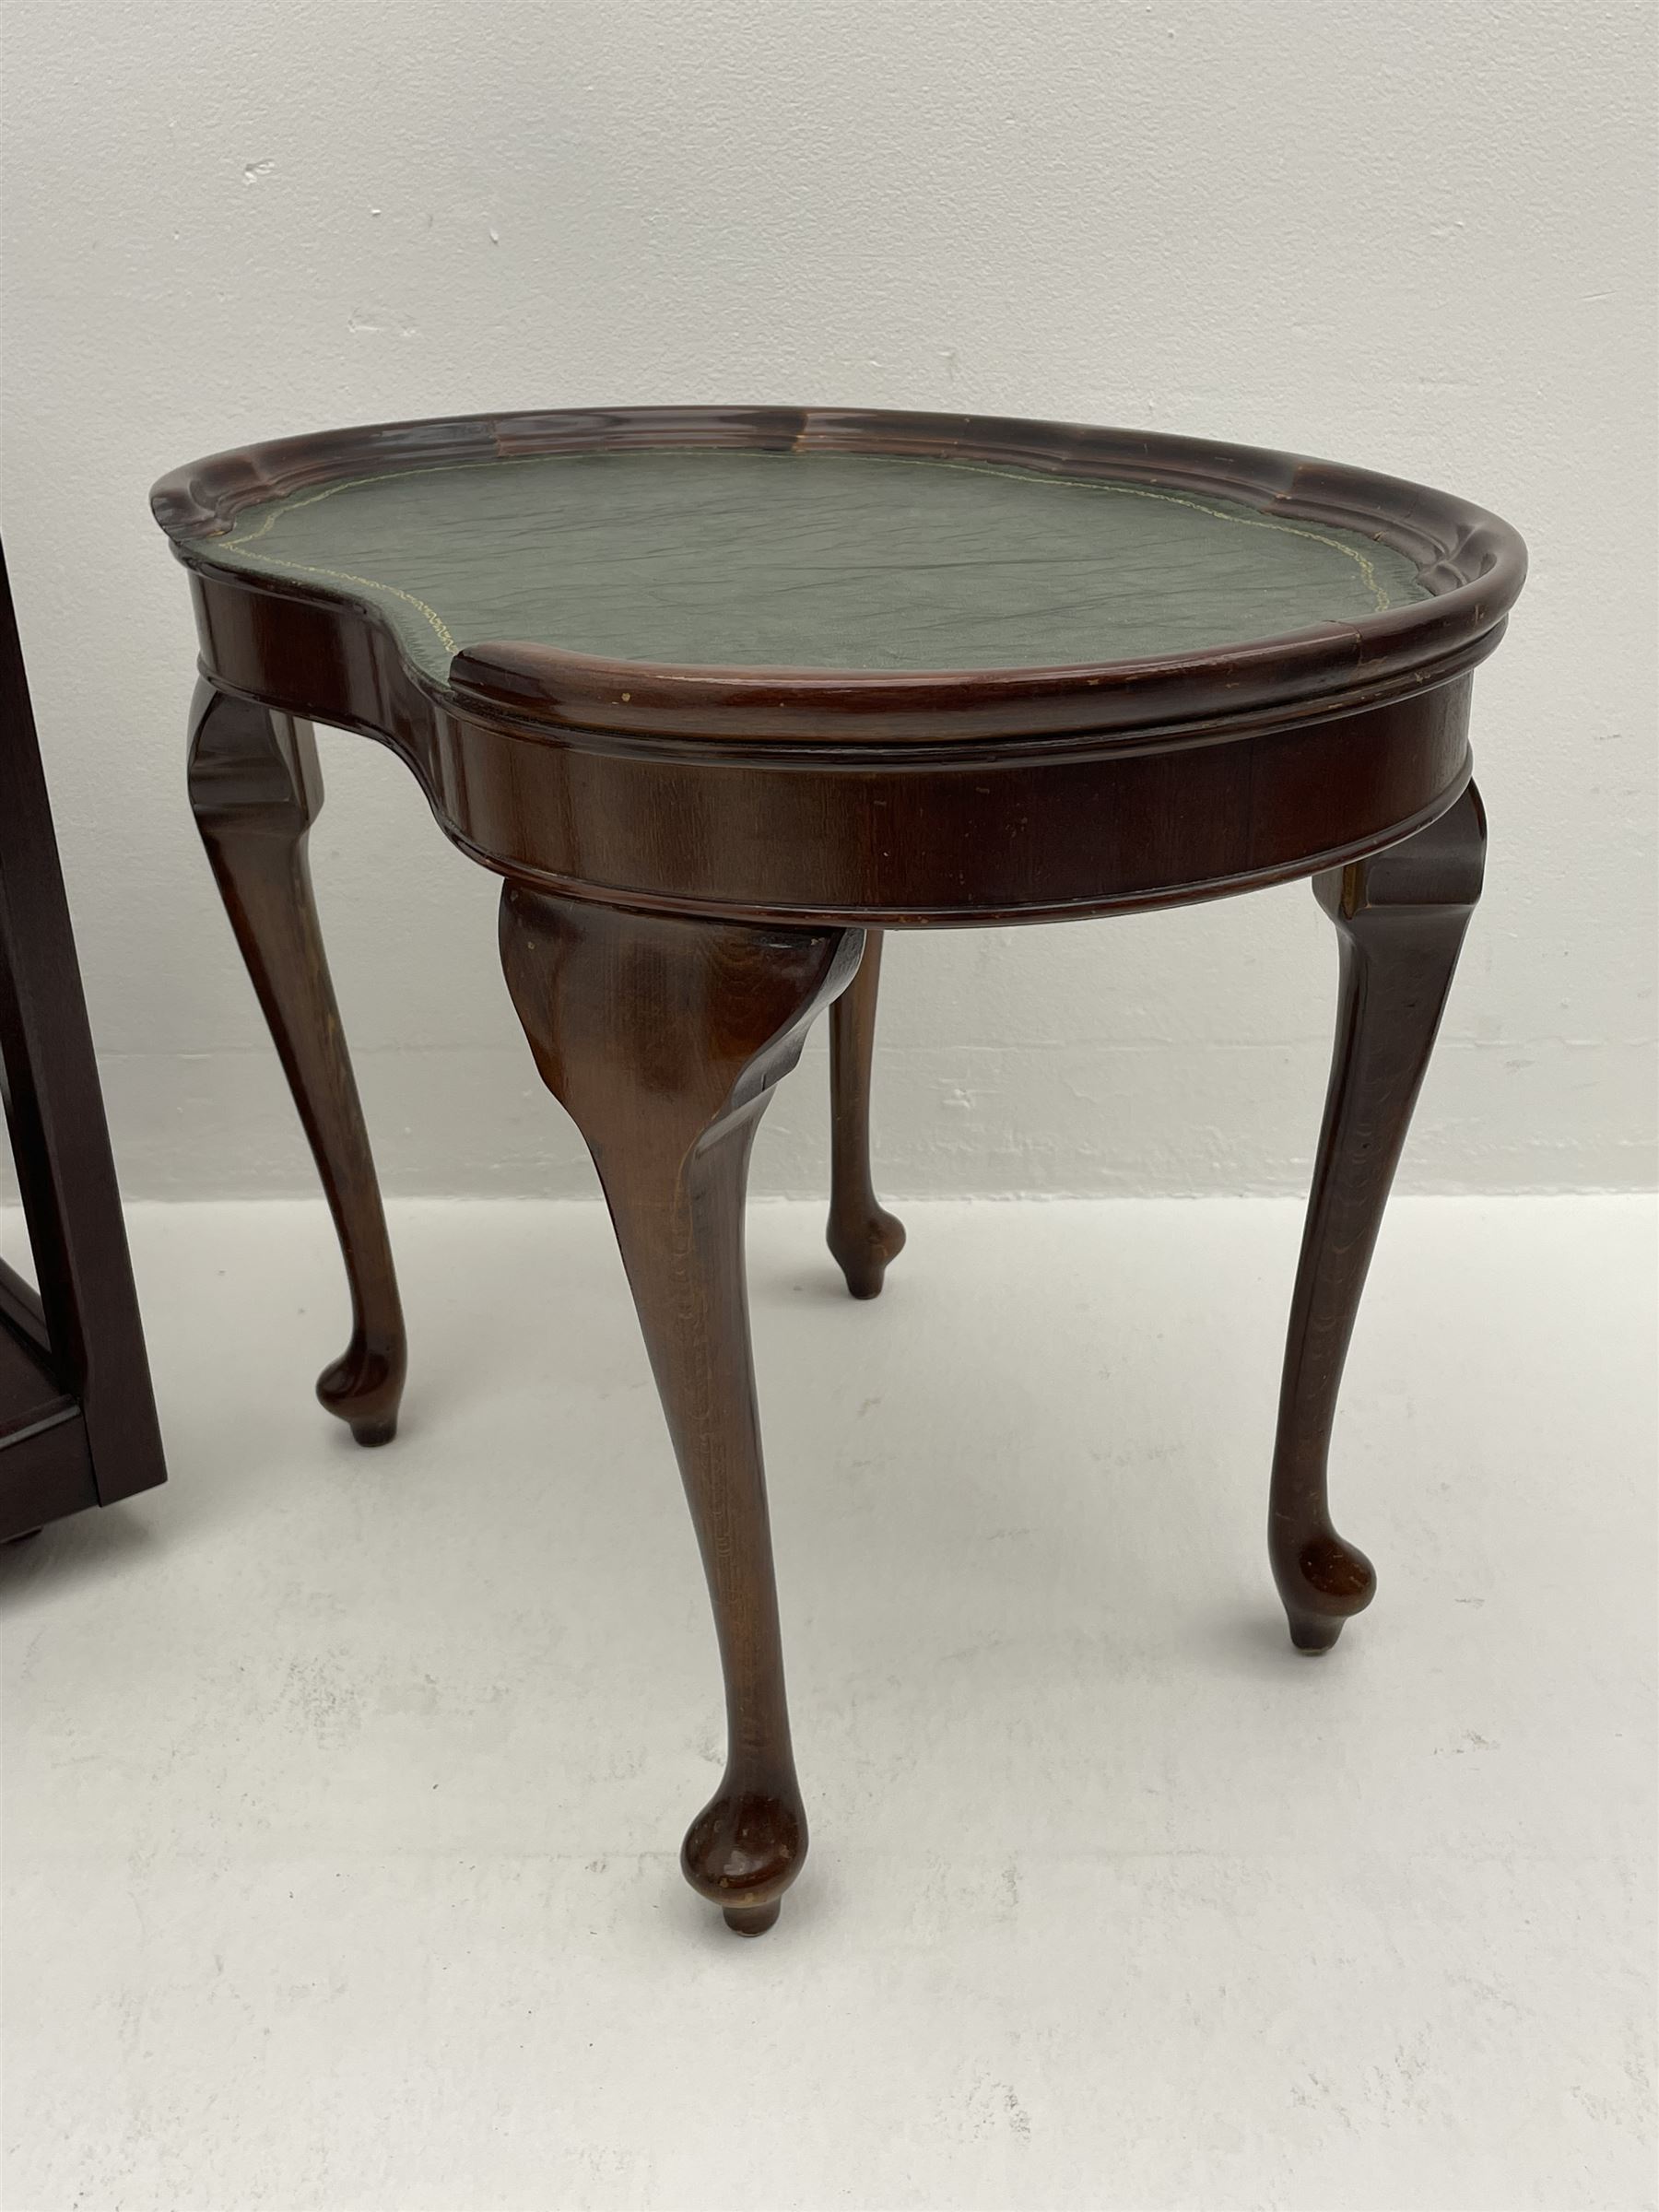 Kidney shaped leather top occasional drinks table - Image 3 of 4